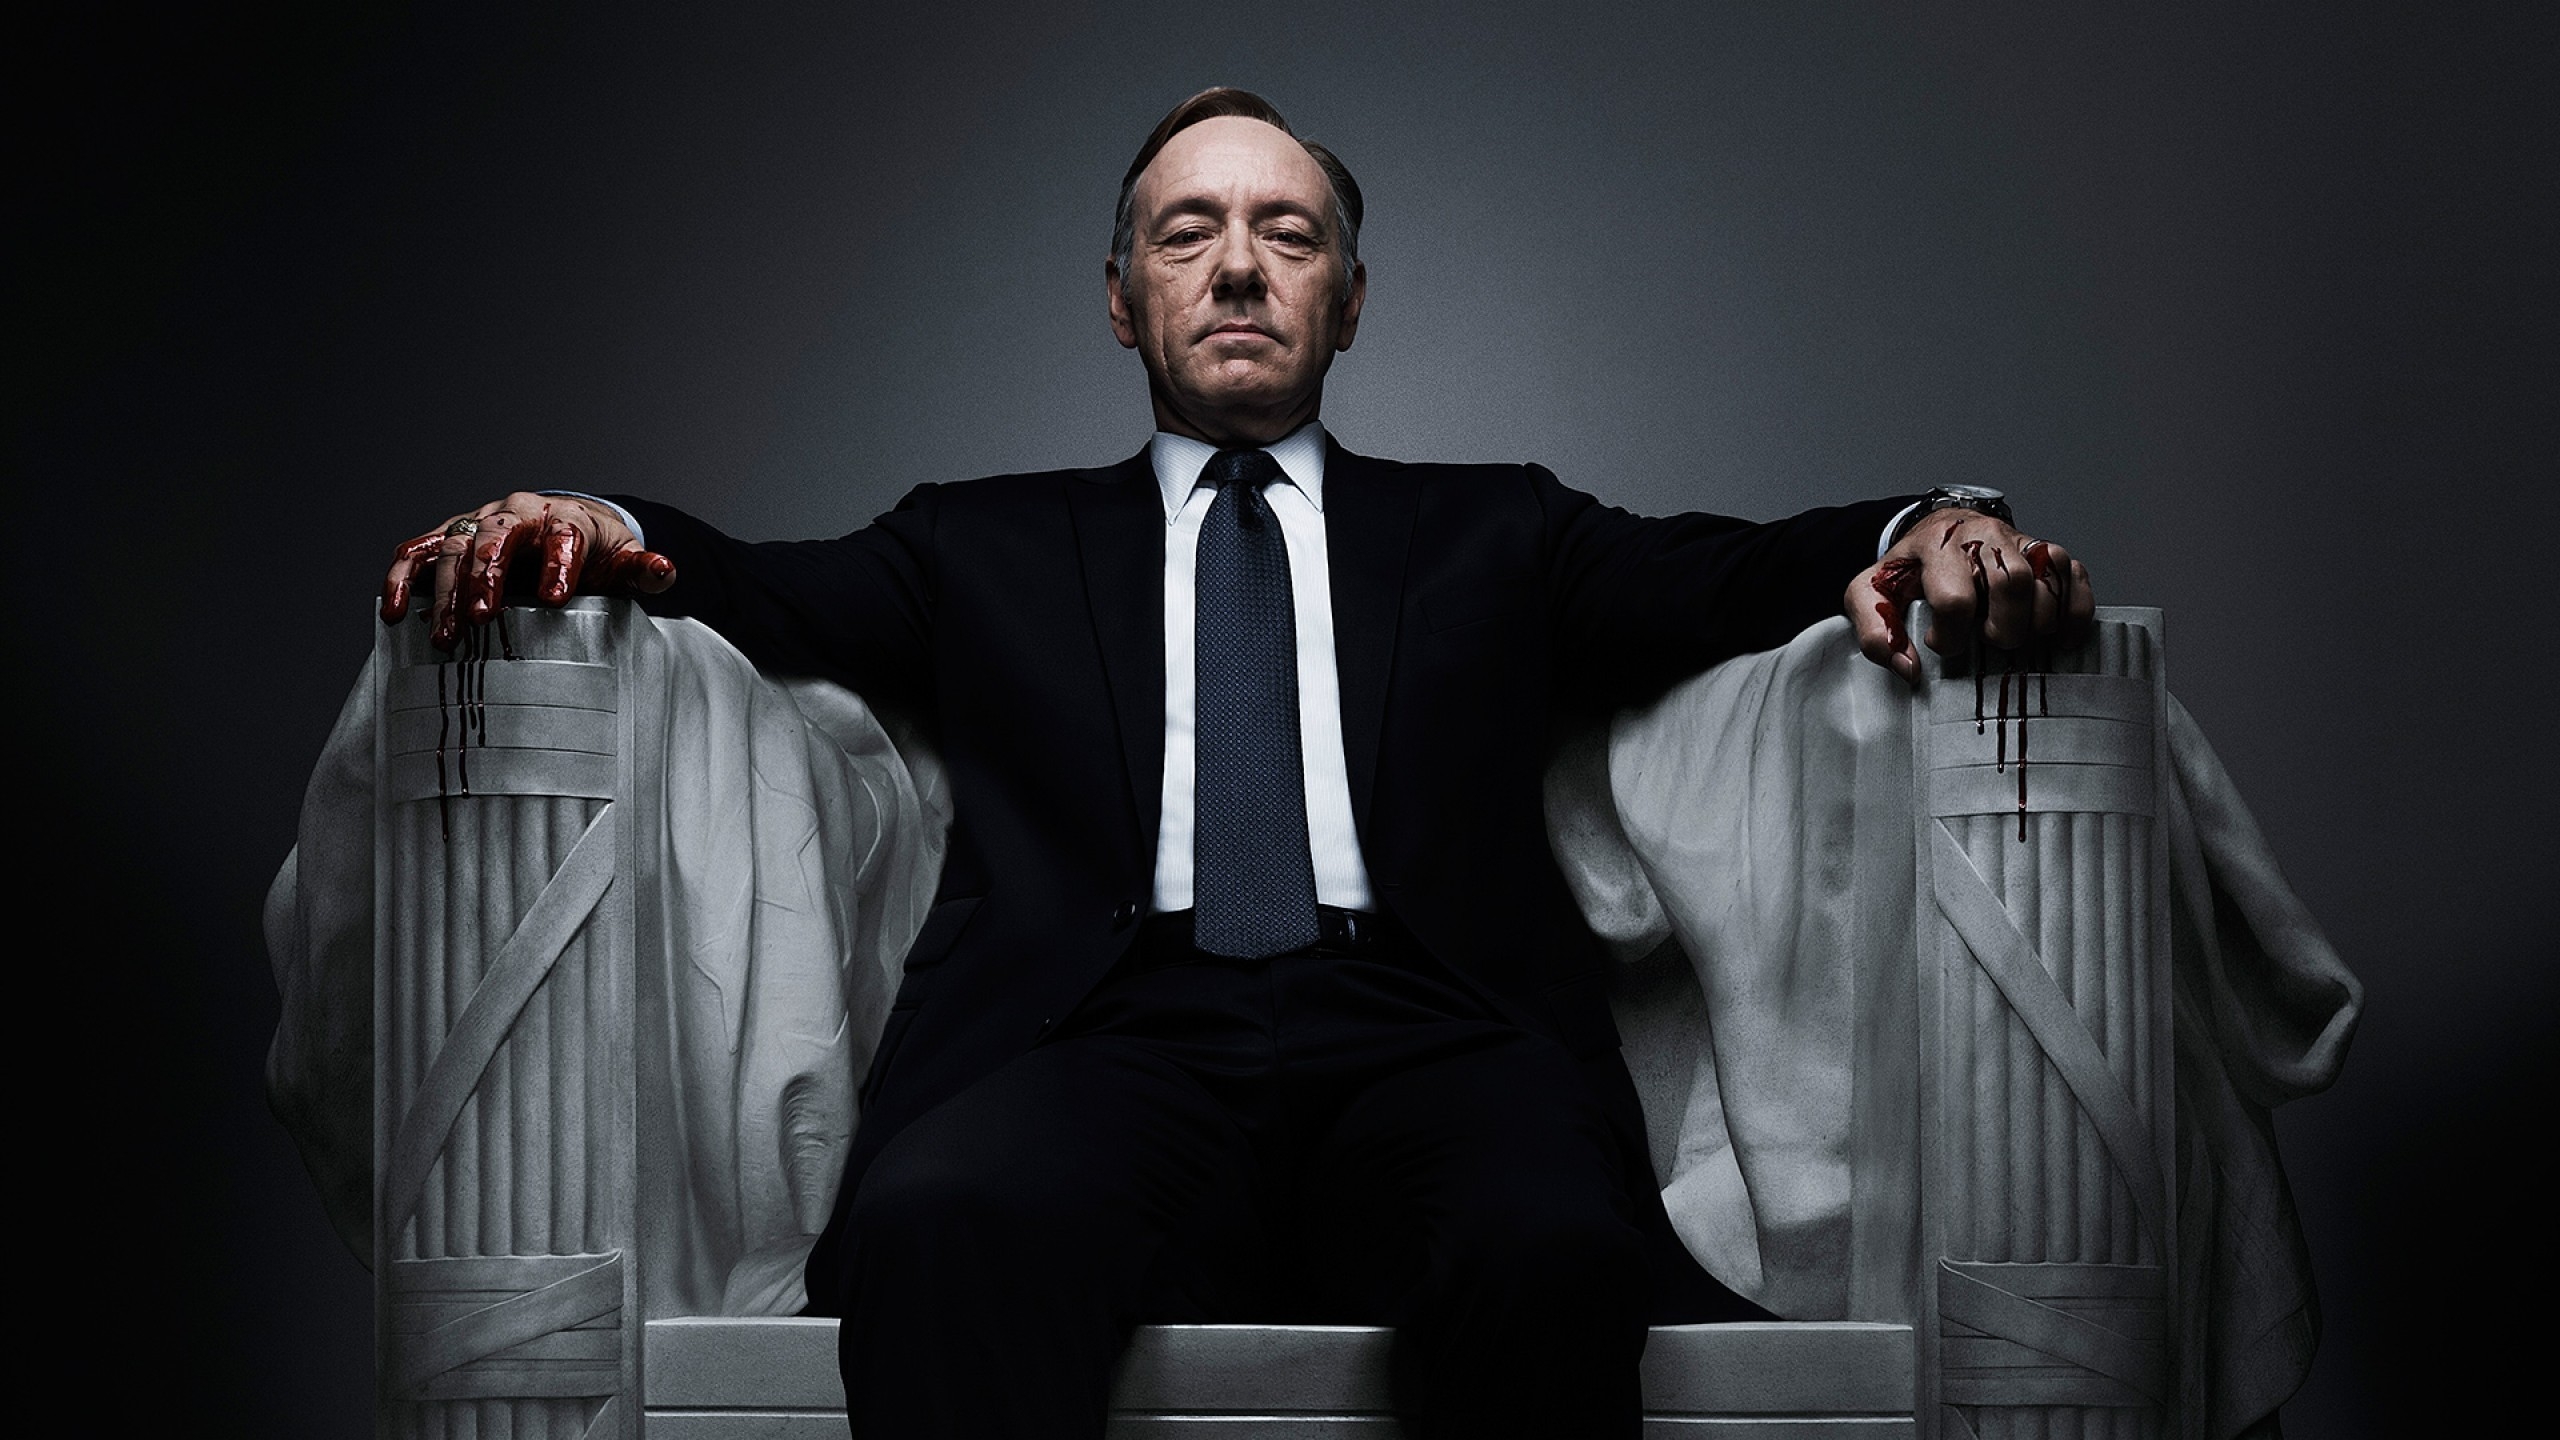 House of Cards for 2560x1440 HDTV resolution